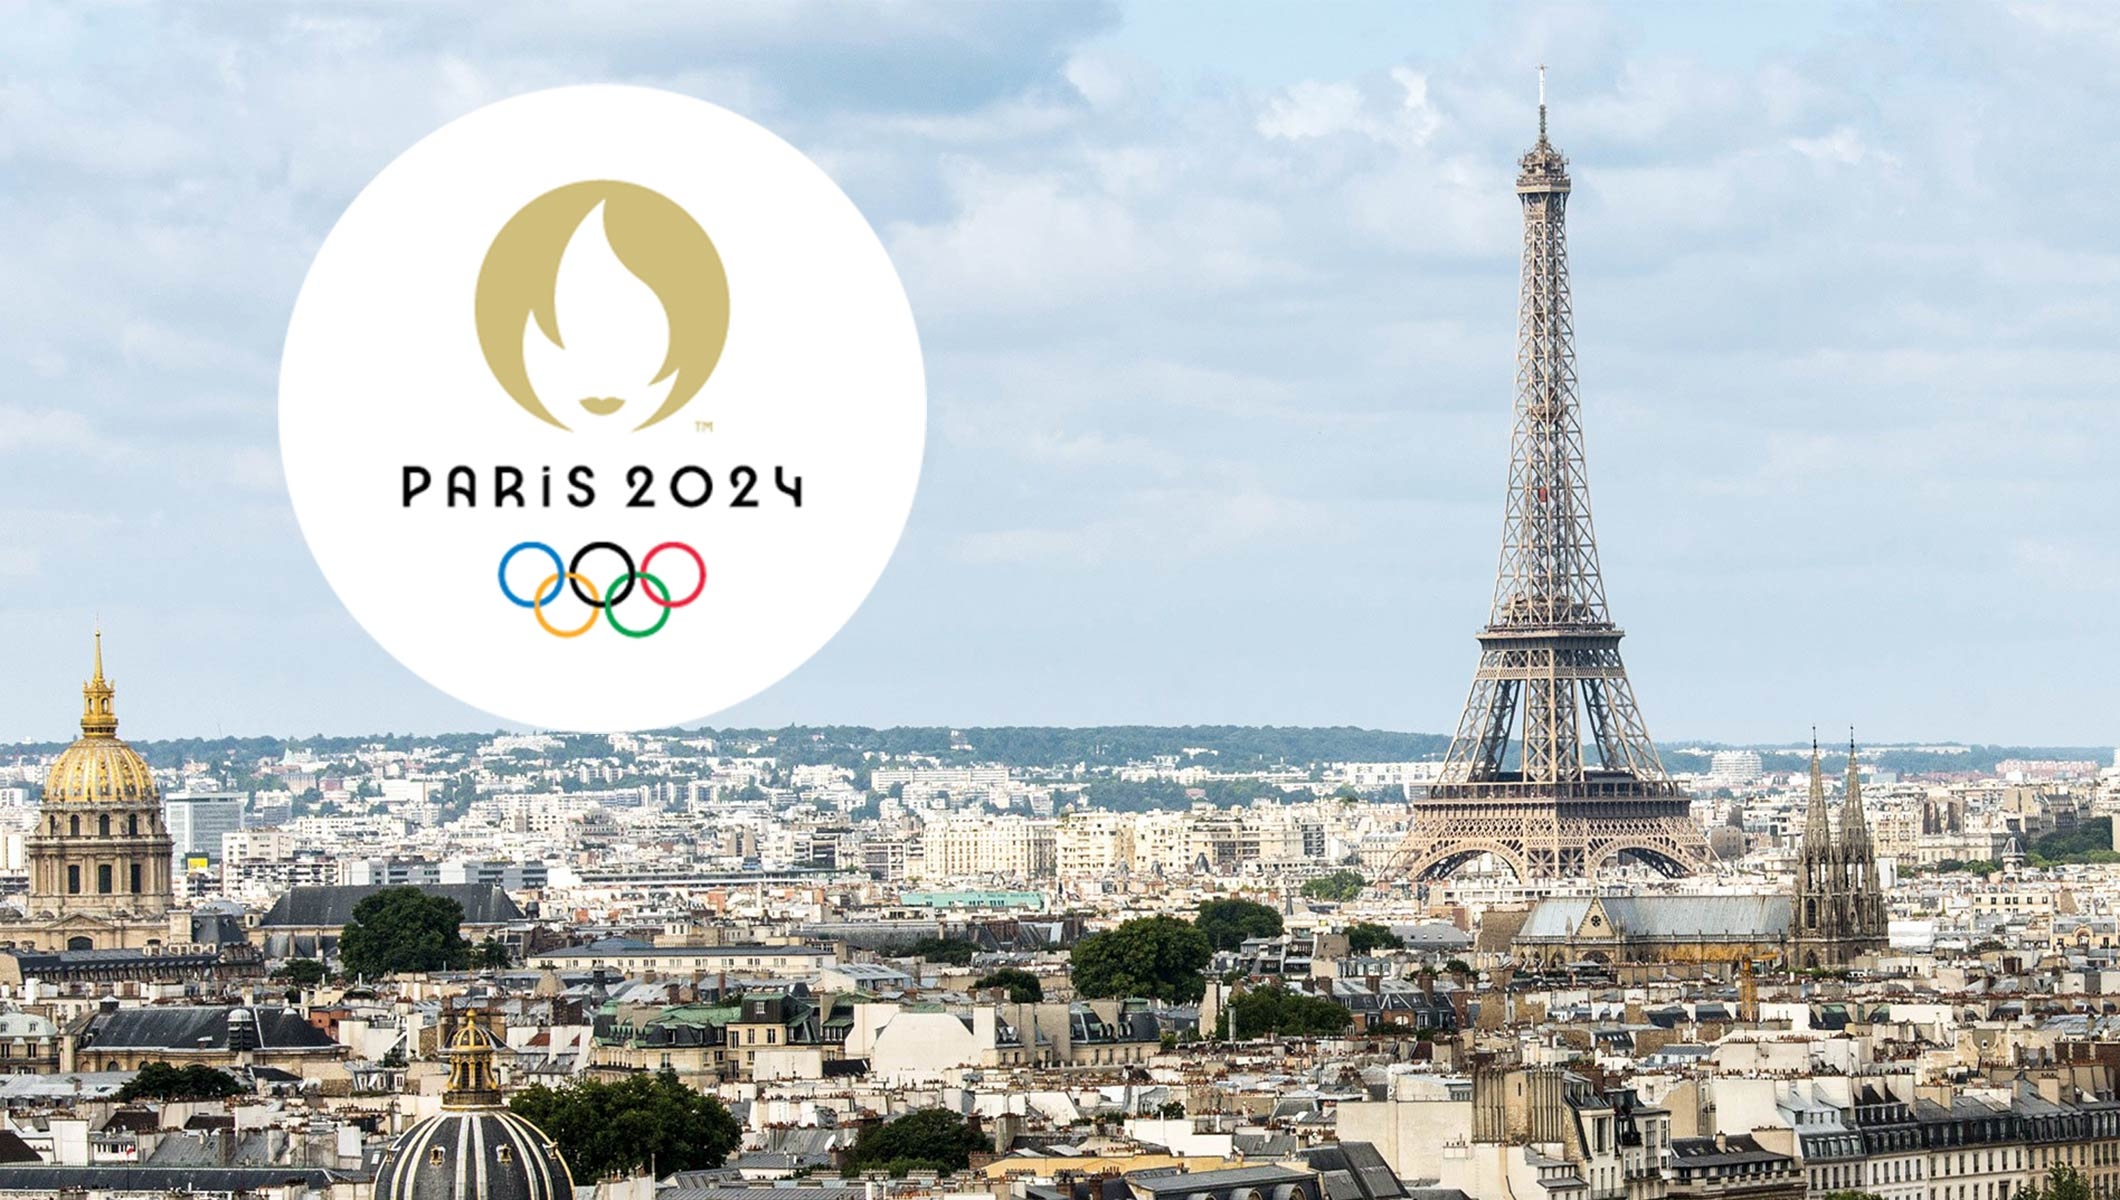 Paris 2024 in the shadow of Tokyo but already hit by coronavirus